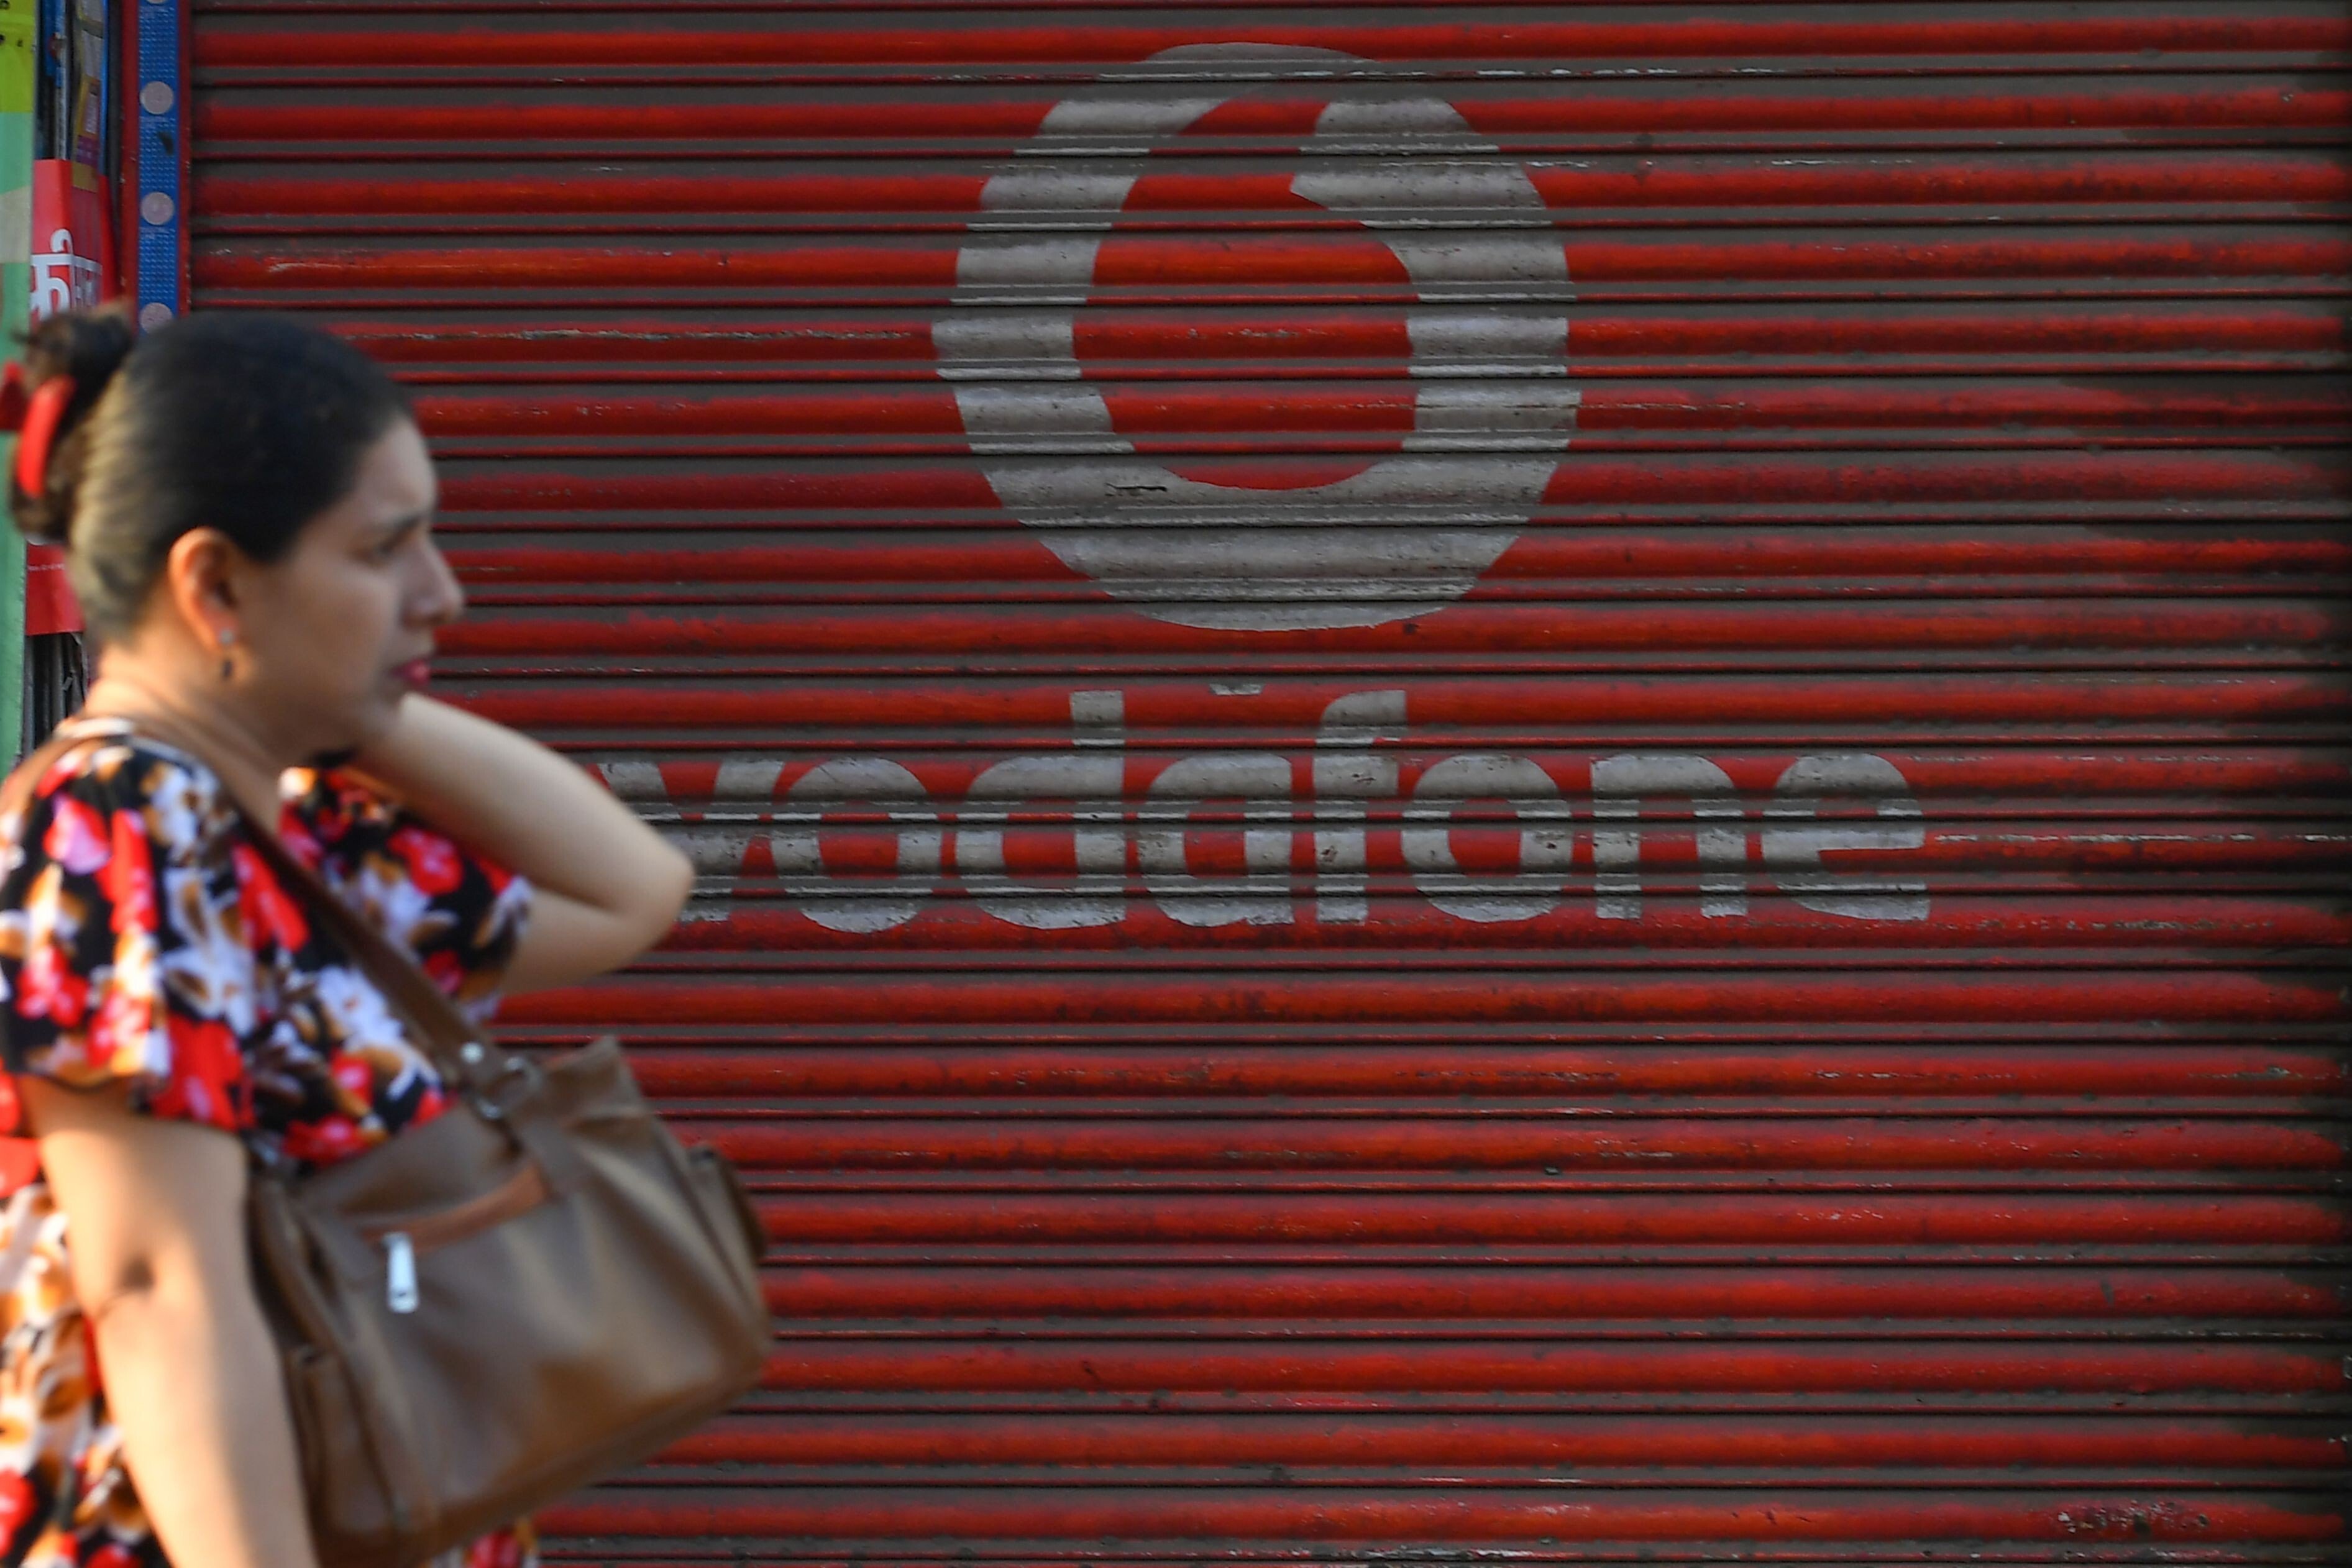 Telecoms giant Vodafone is among the companies challenging New Delhi’s tax claims. Photo: AFP